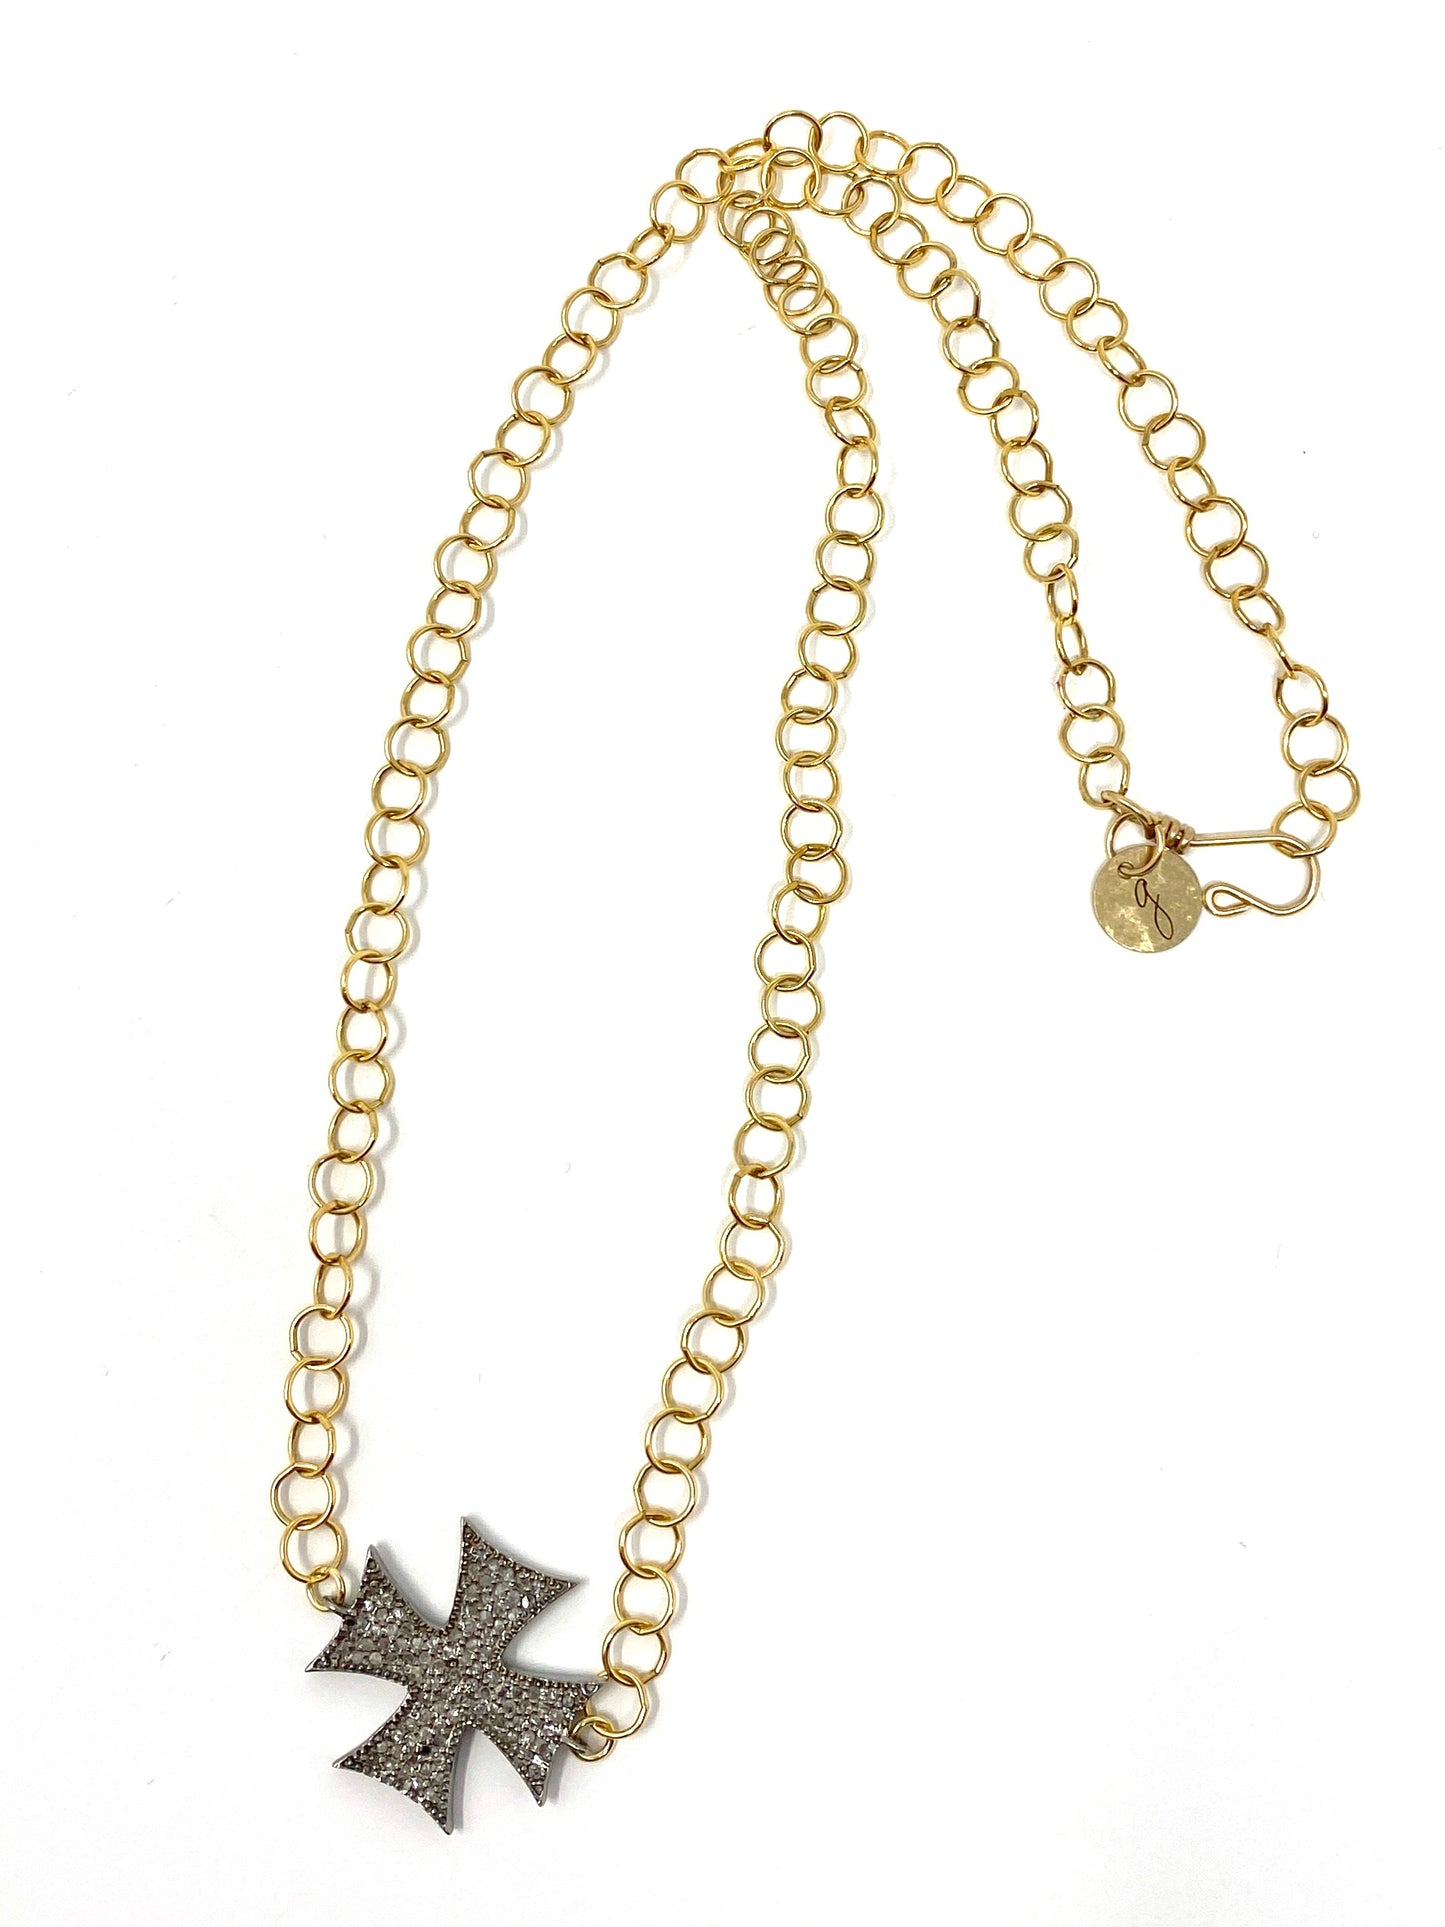 Gold Filled Chain Necklace With Pave Diamond Cross Connector